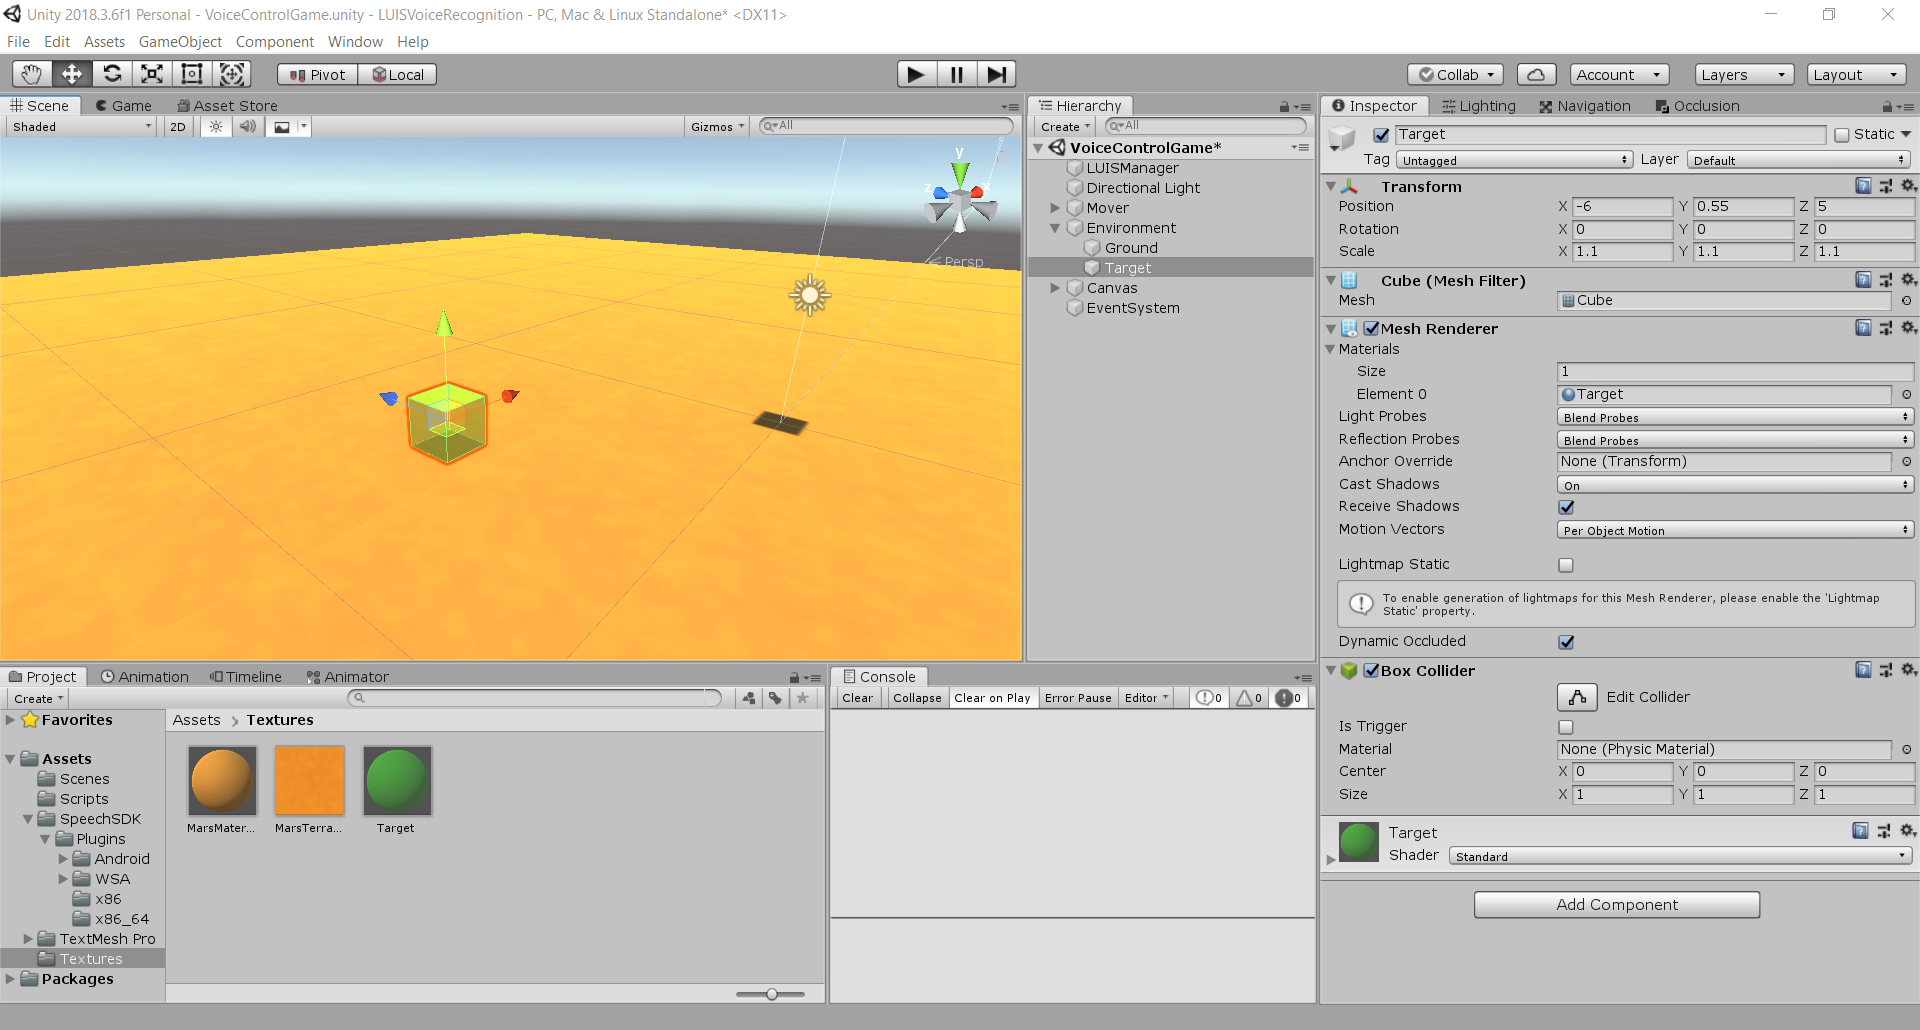 Target object within Unity project